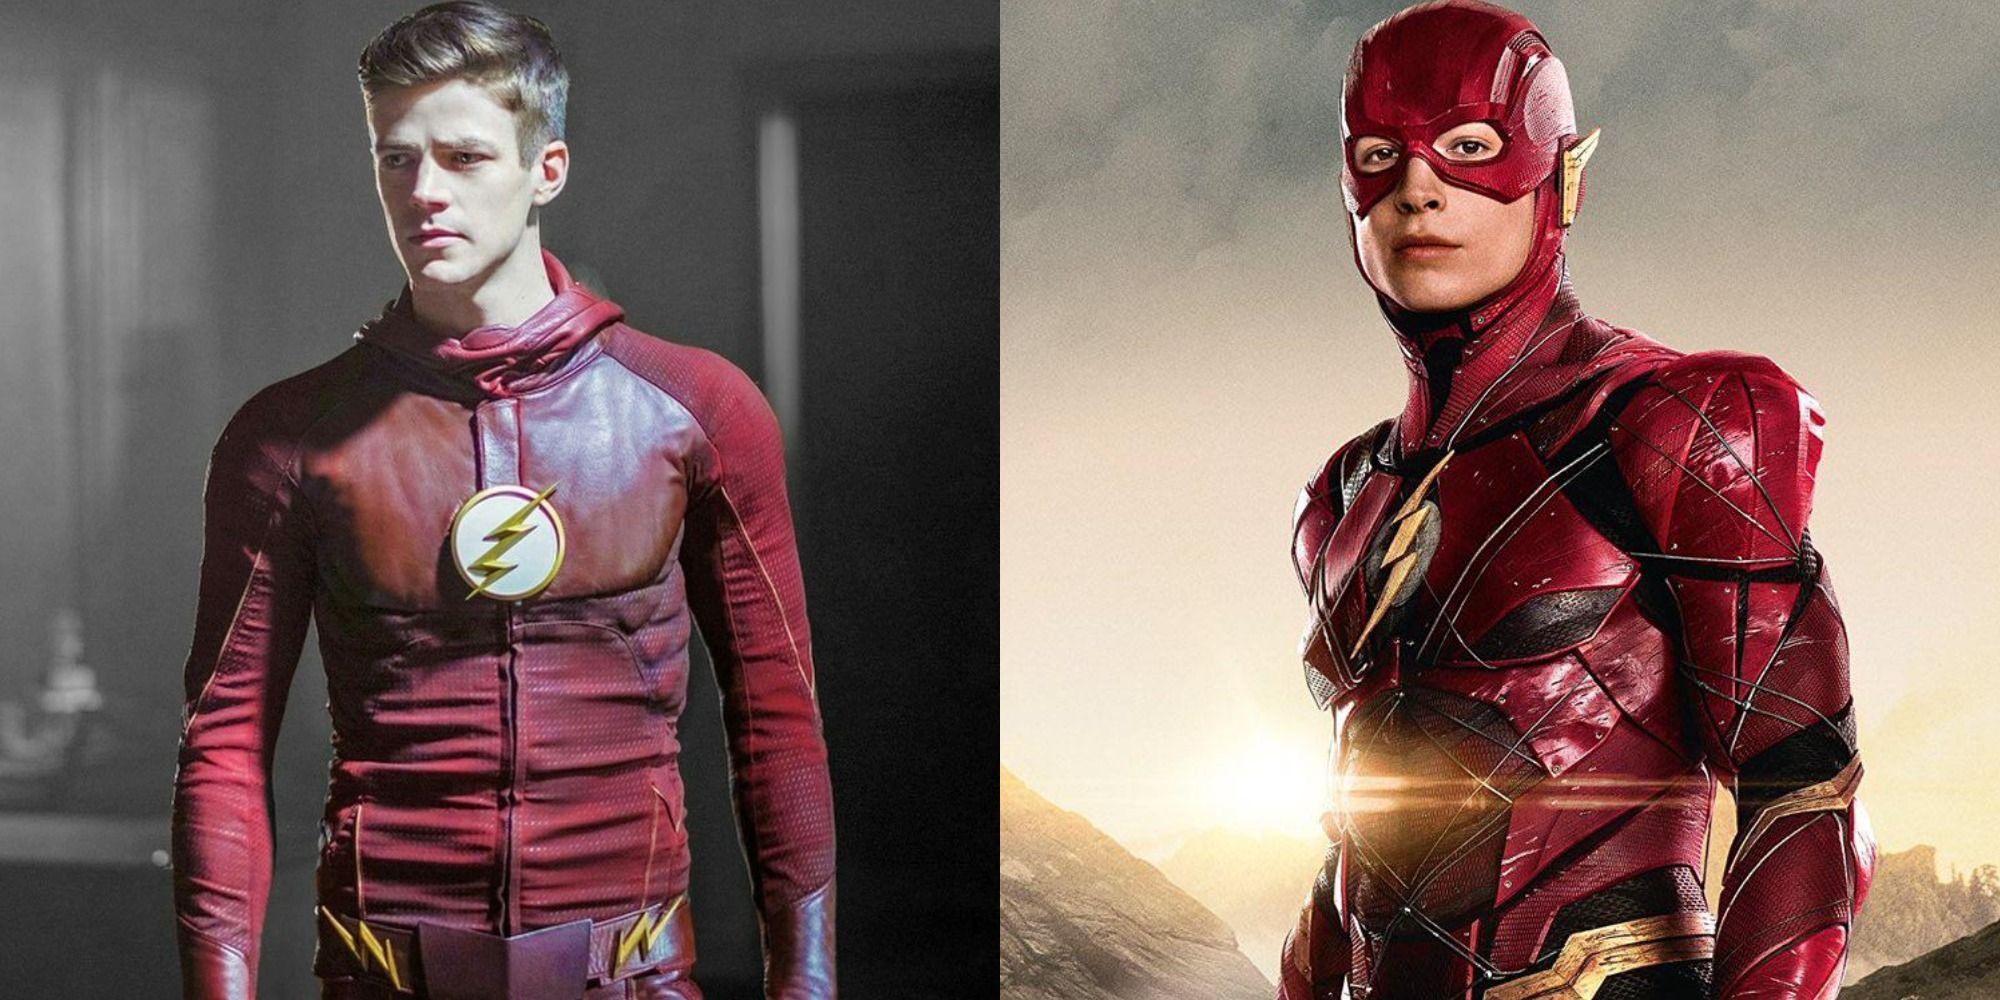 Split iamge of Grant Gustin and Ezra Miller as the Flash